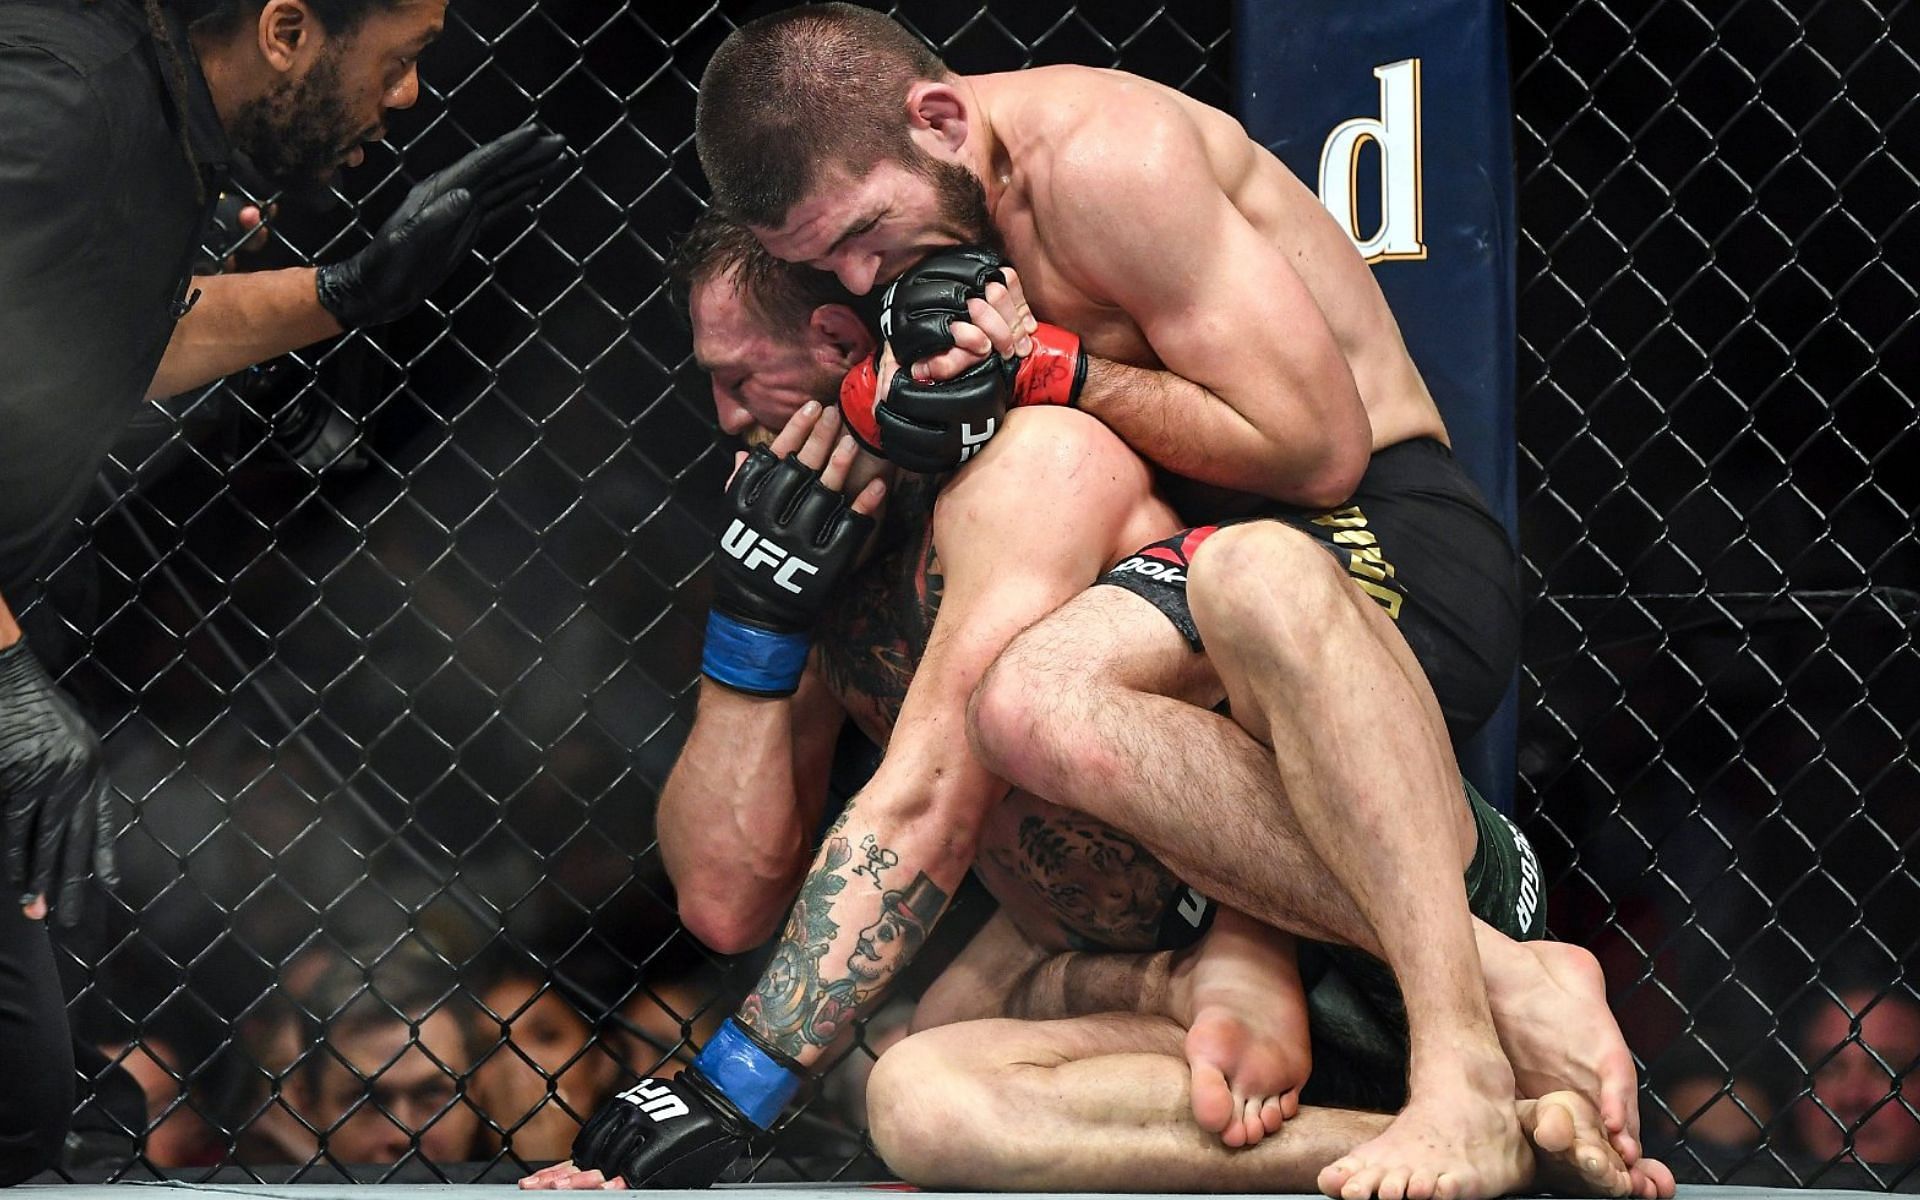 UFC 229: Khabib Nurmagomedov chokes out Conor McGregor in the fourth round [Image via @espnmma on Twitter]